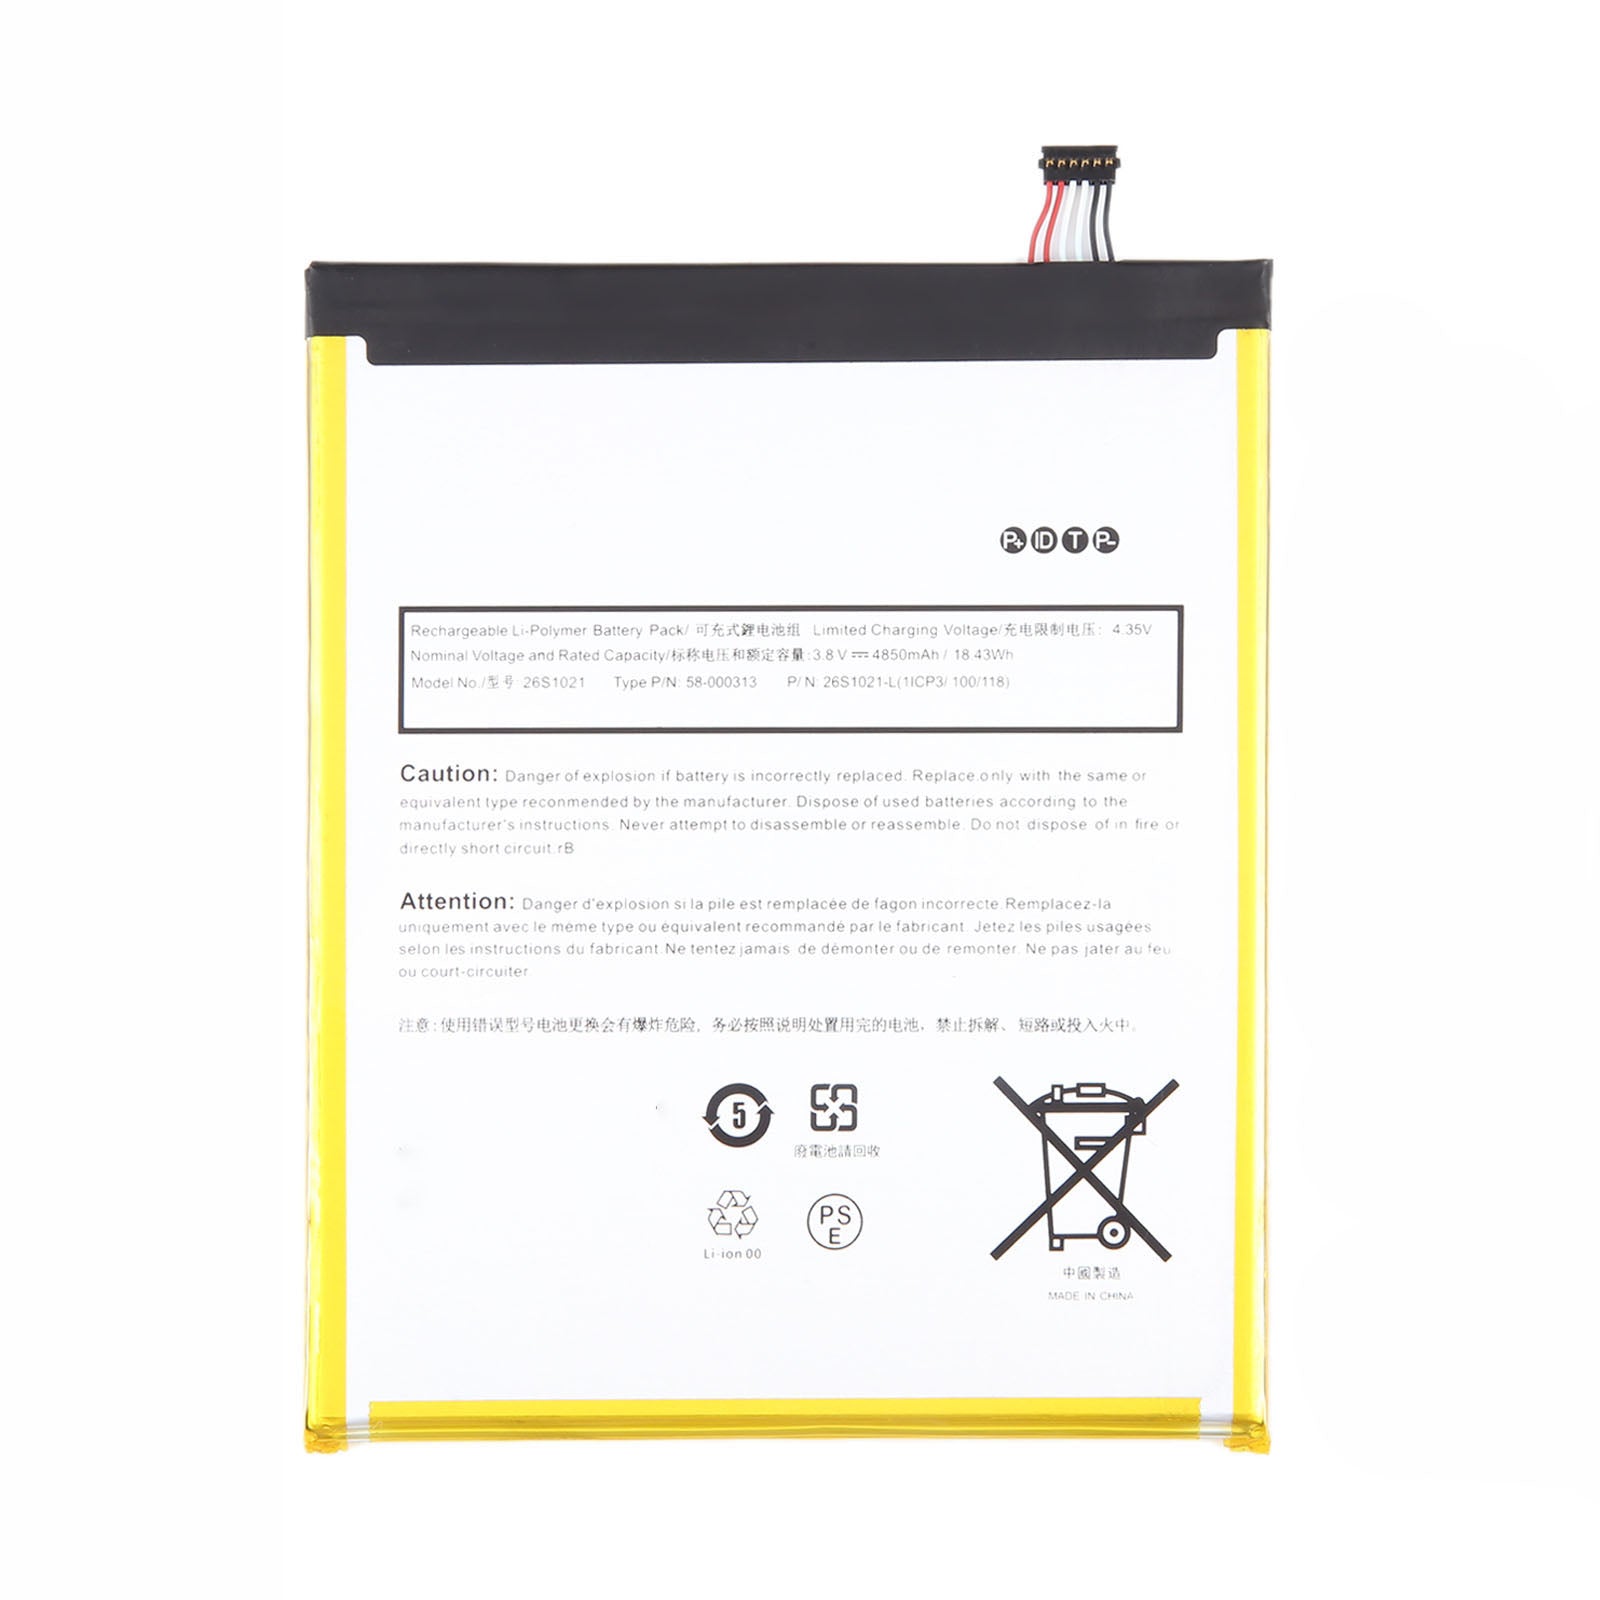 Replacement Battery For Amazon Fire HD 8 Plus 10th Gen 2020 - 26S1021